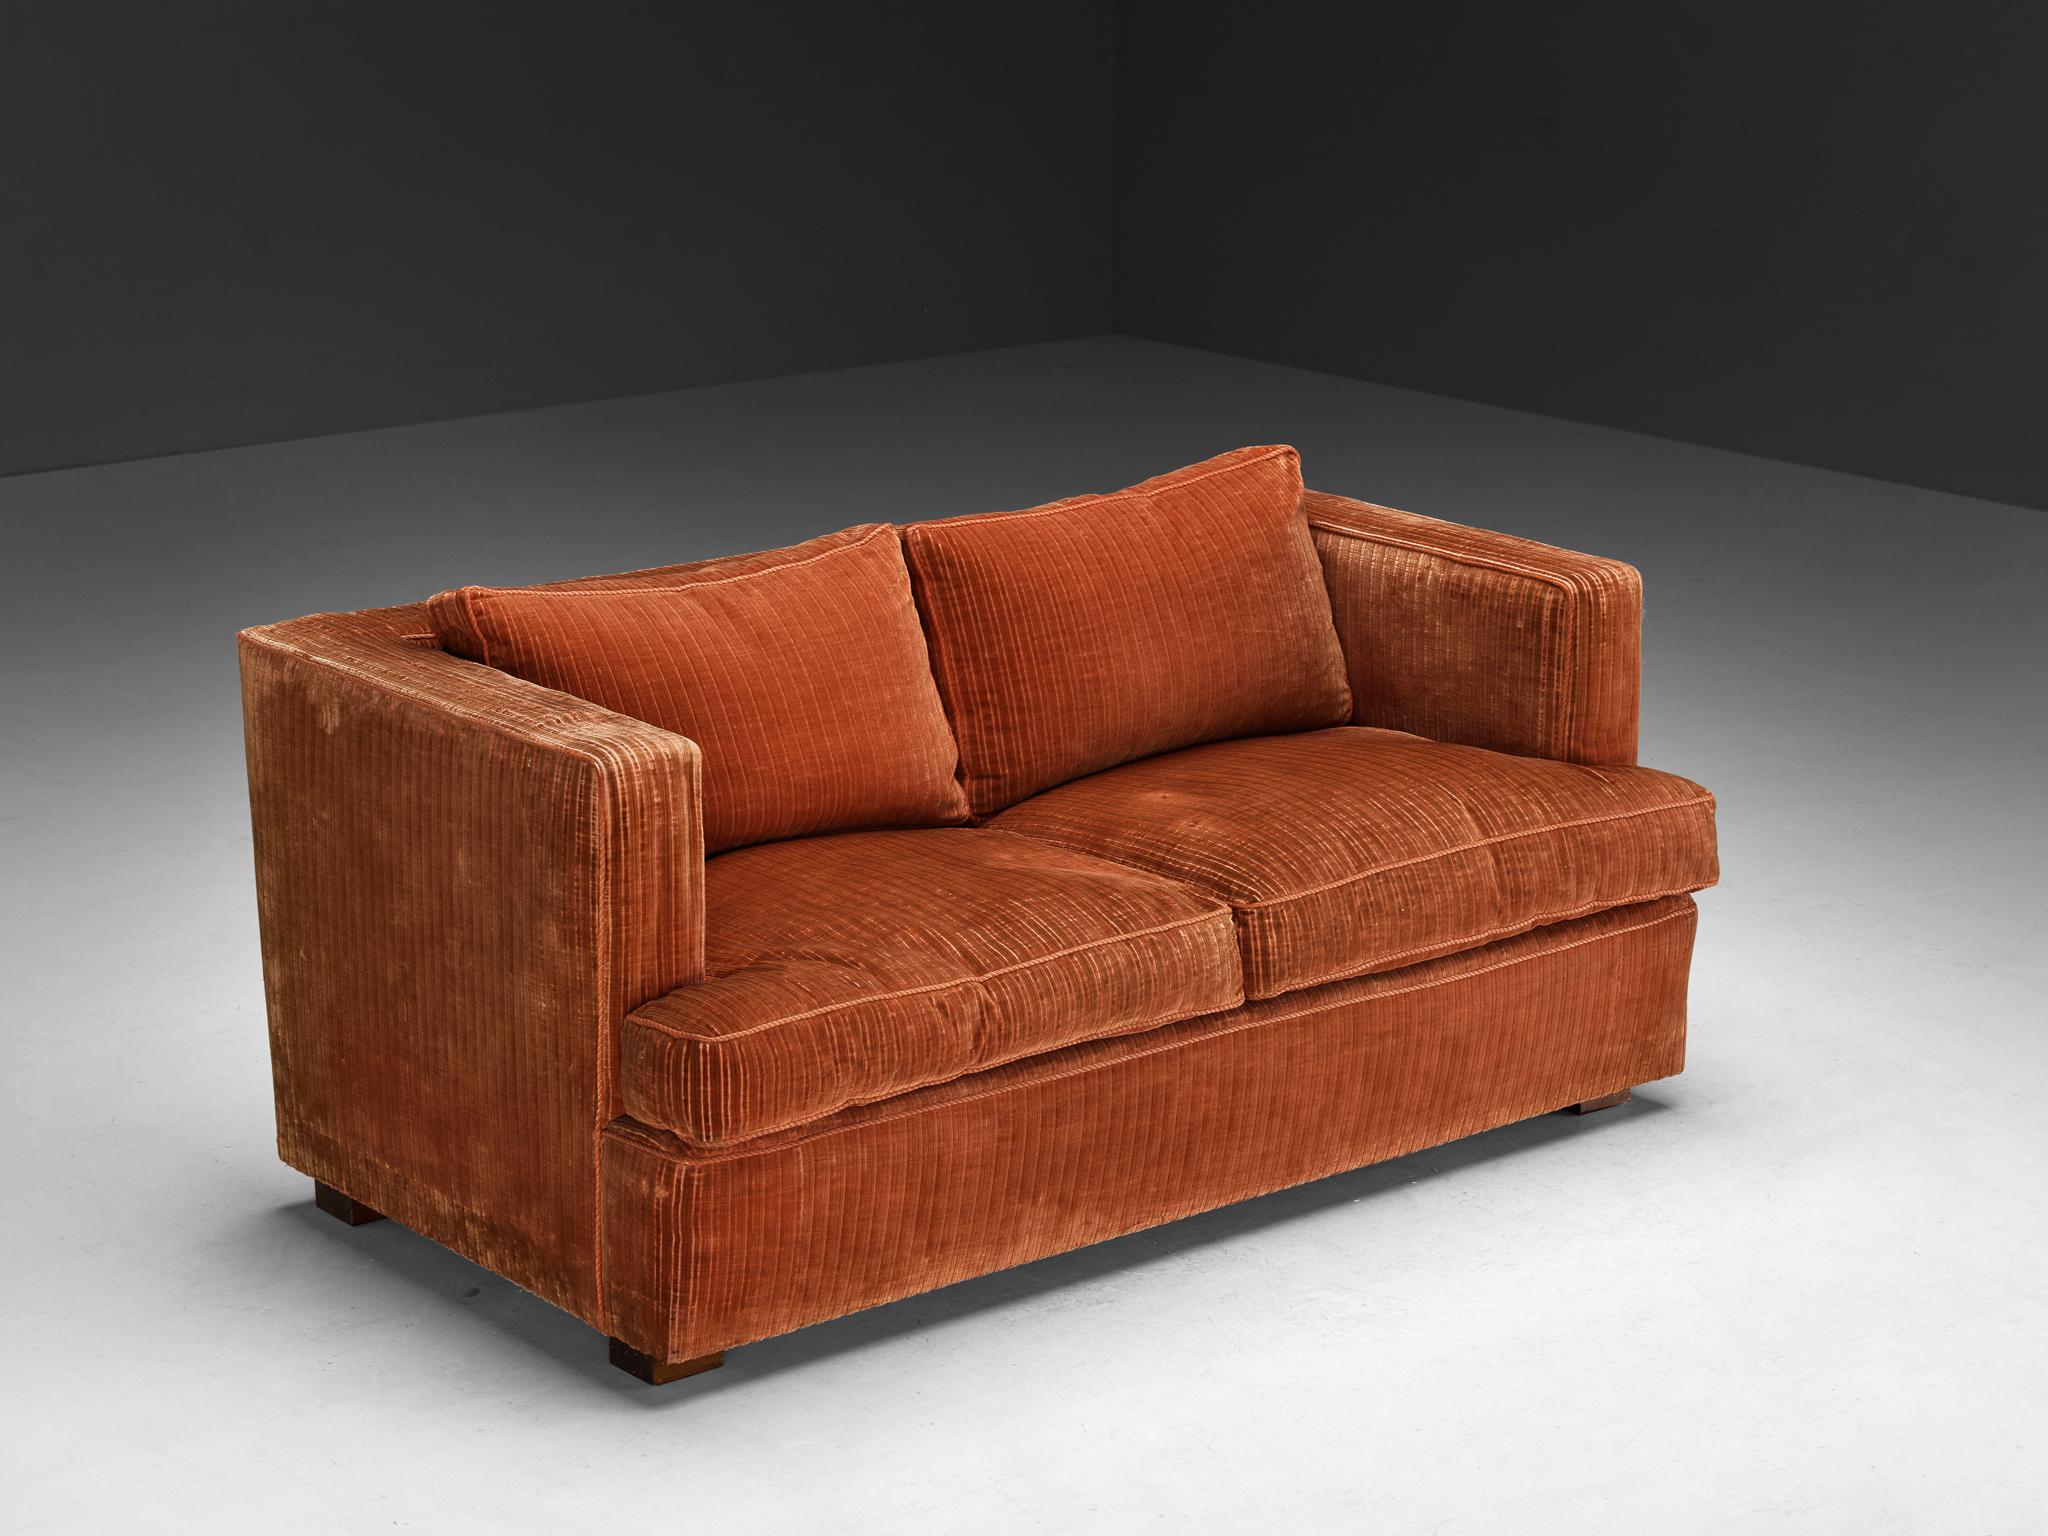 Sofa, corduroy velvet, wood, Italy, 1970s

This delicate sofa has a cozy and bulky appeal. An dark orange to peach velvet has been used to cover the seating. The textured surface of the fabric, consisting of vertical lines, adds a graphical touch to